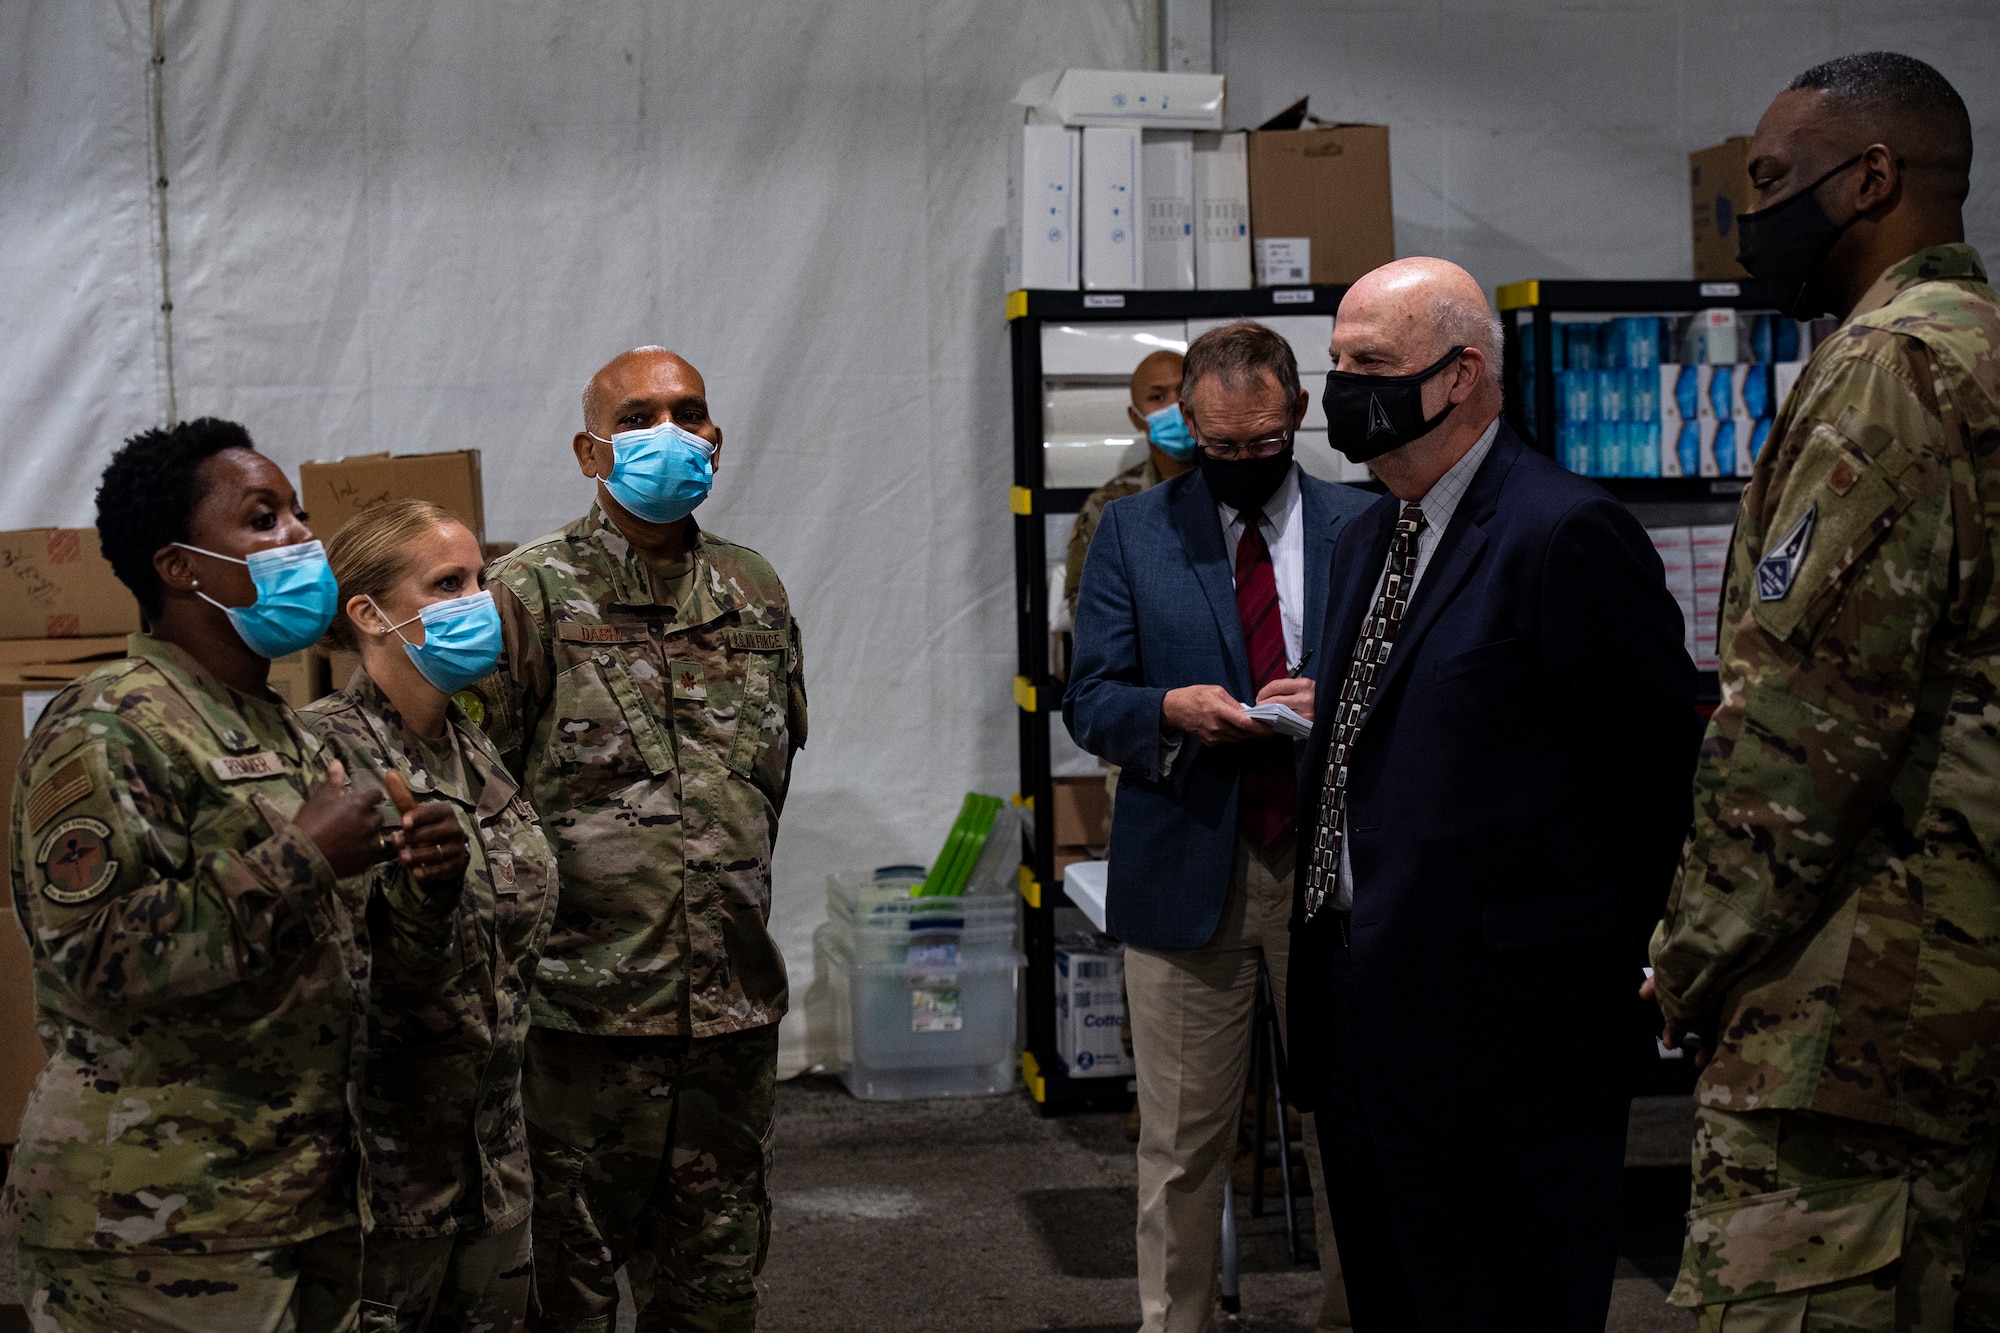 Airmen showcase COVID-19 Community Vaccination Center mission during Acting SecAF visit